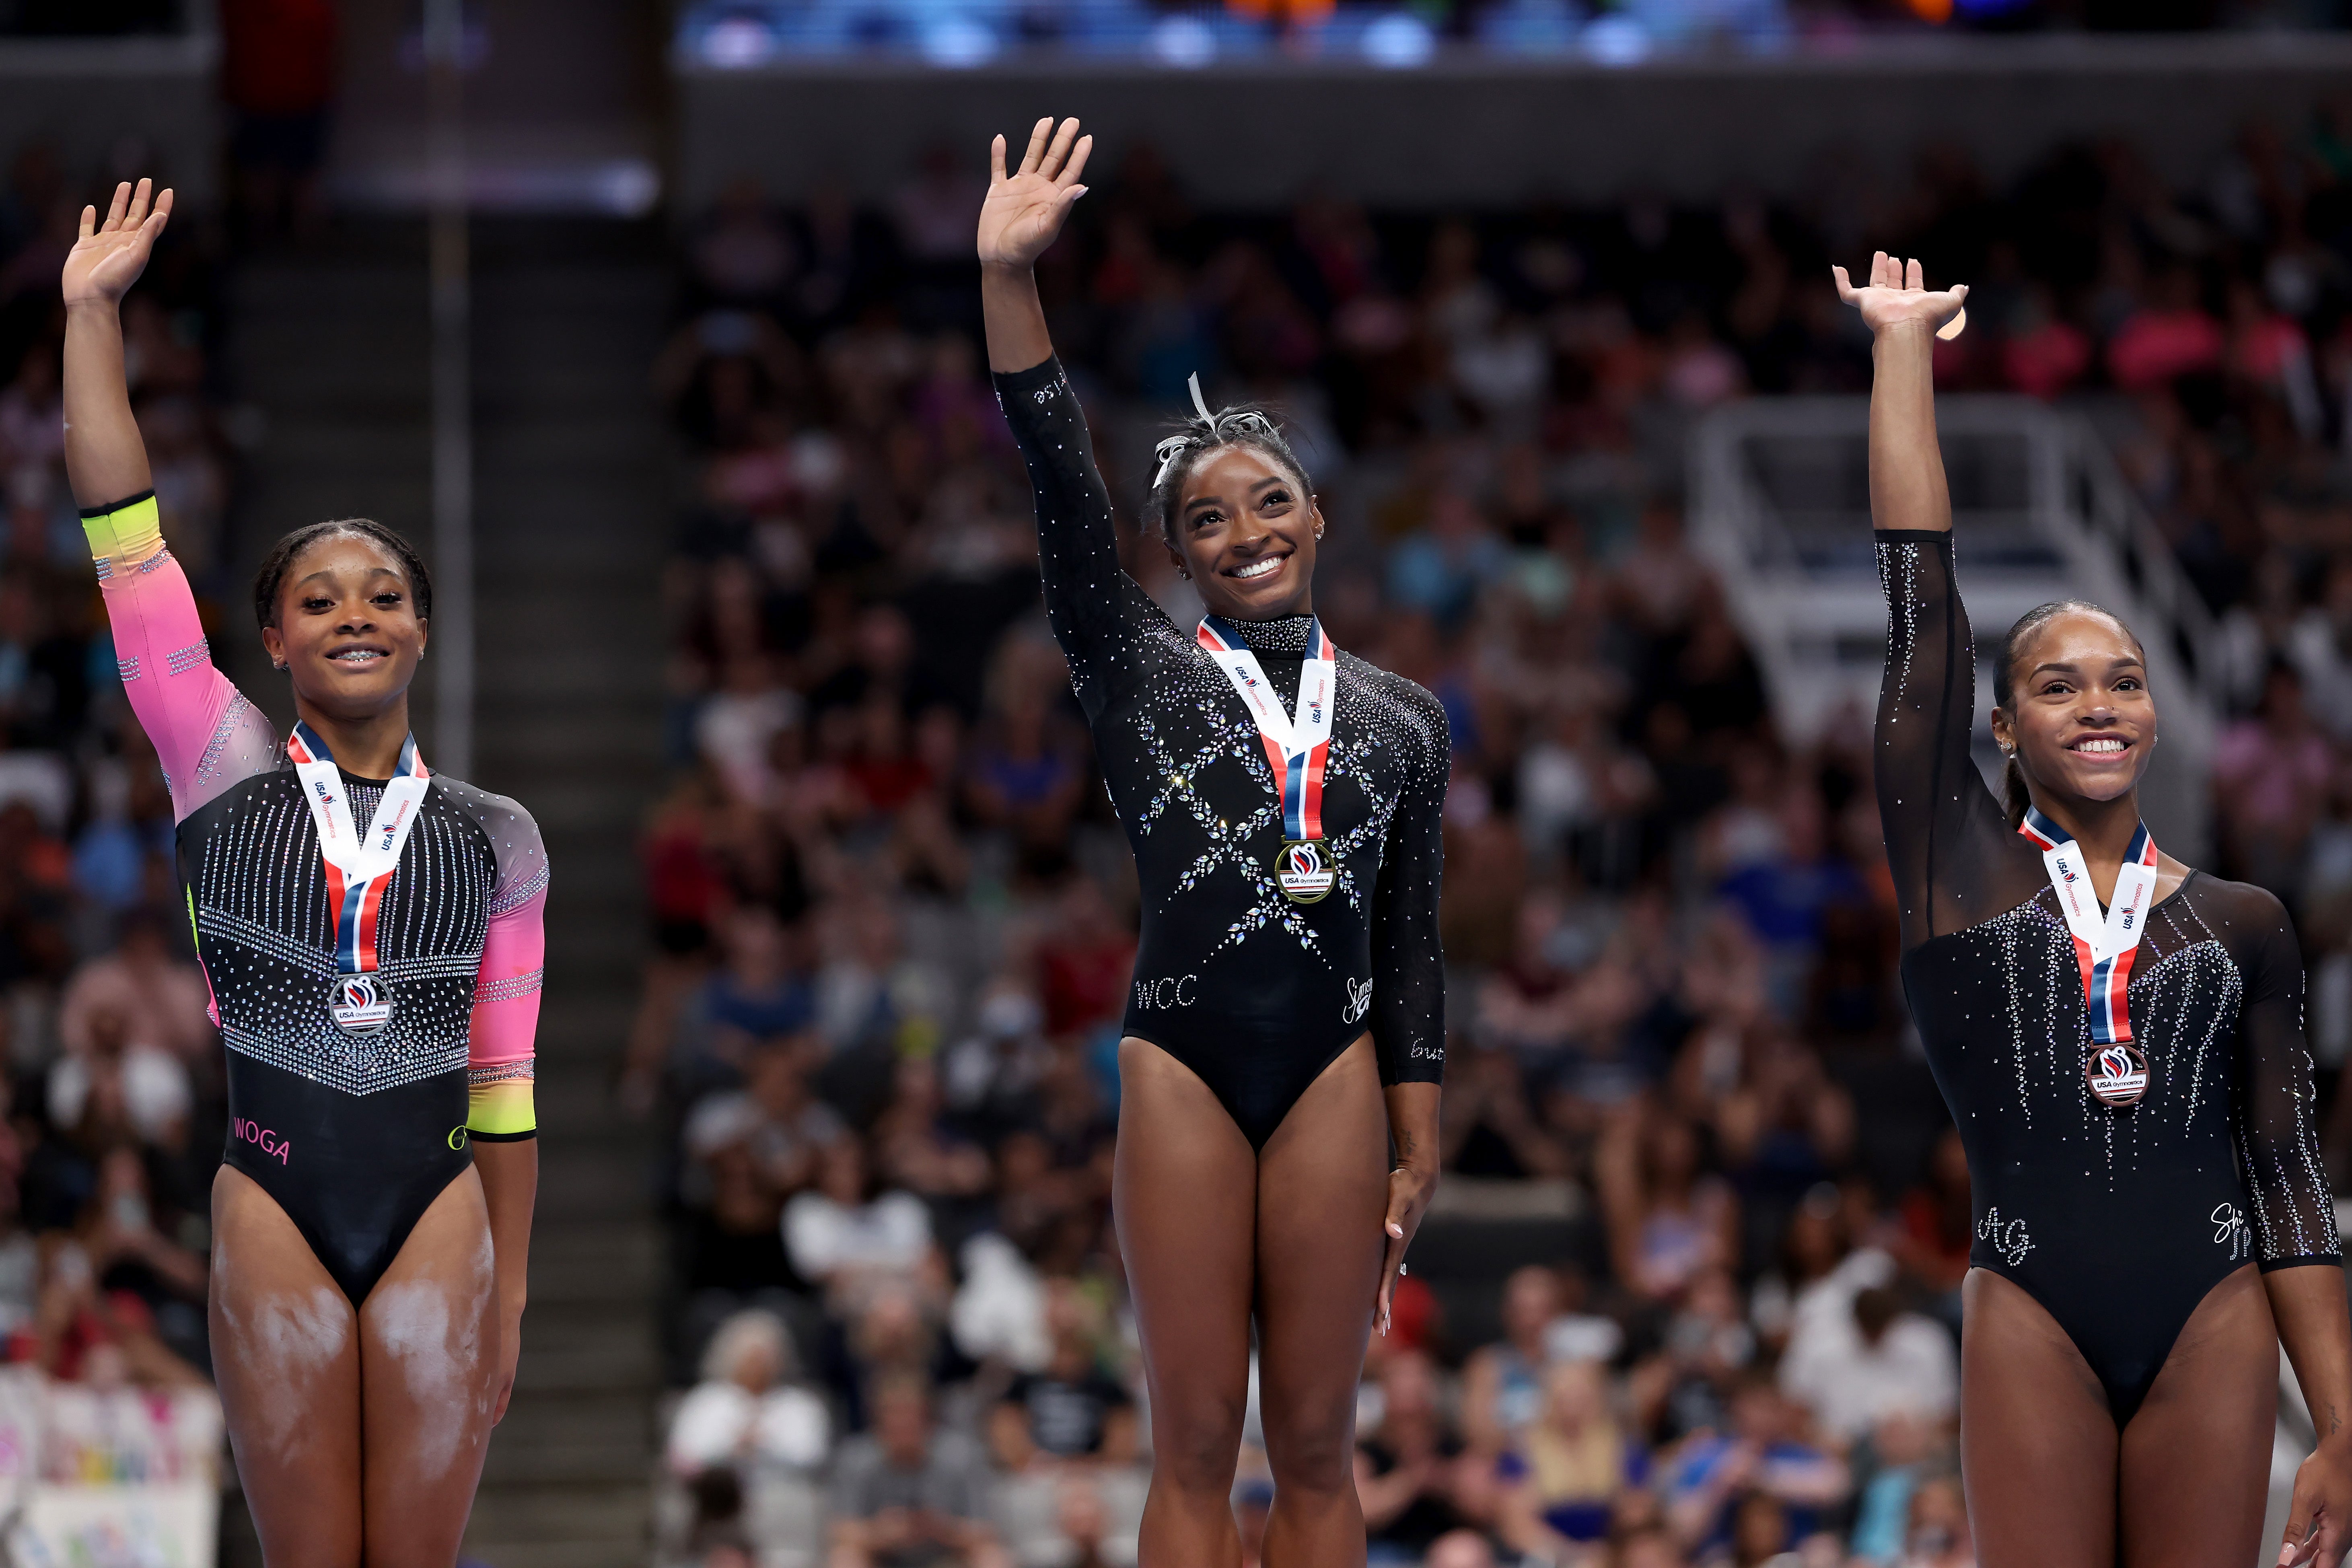 Simone Biles stands on top of the podium at the US Championships